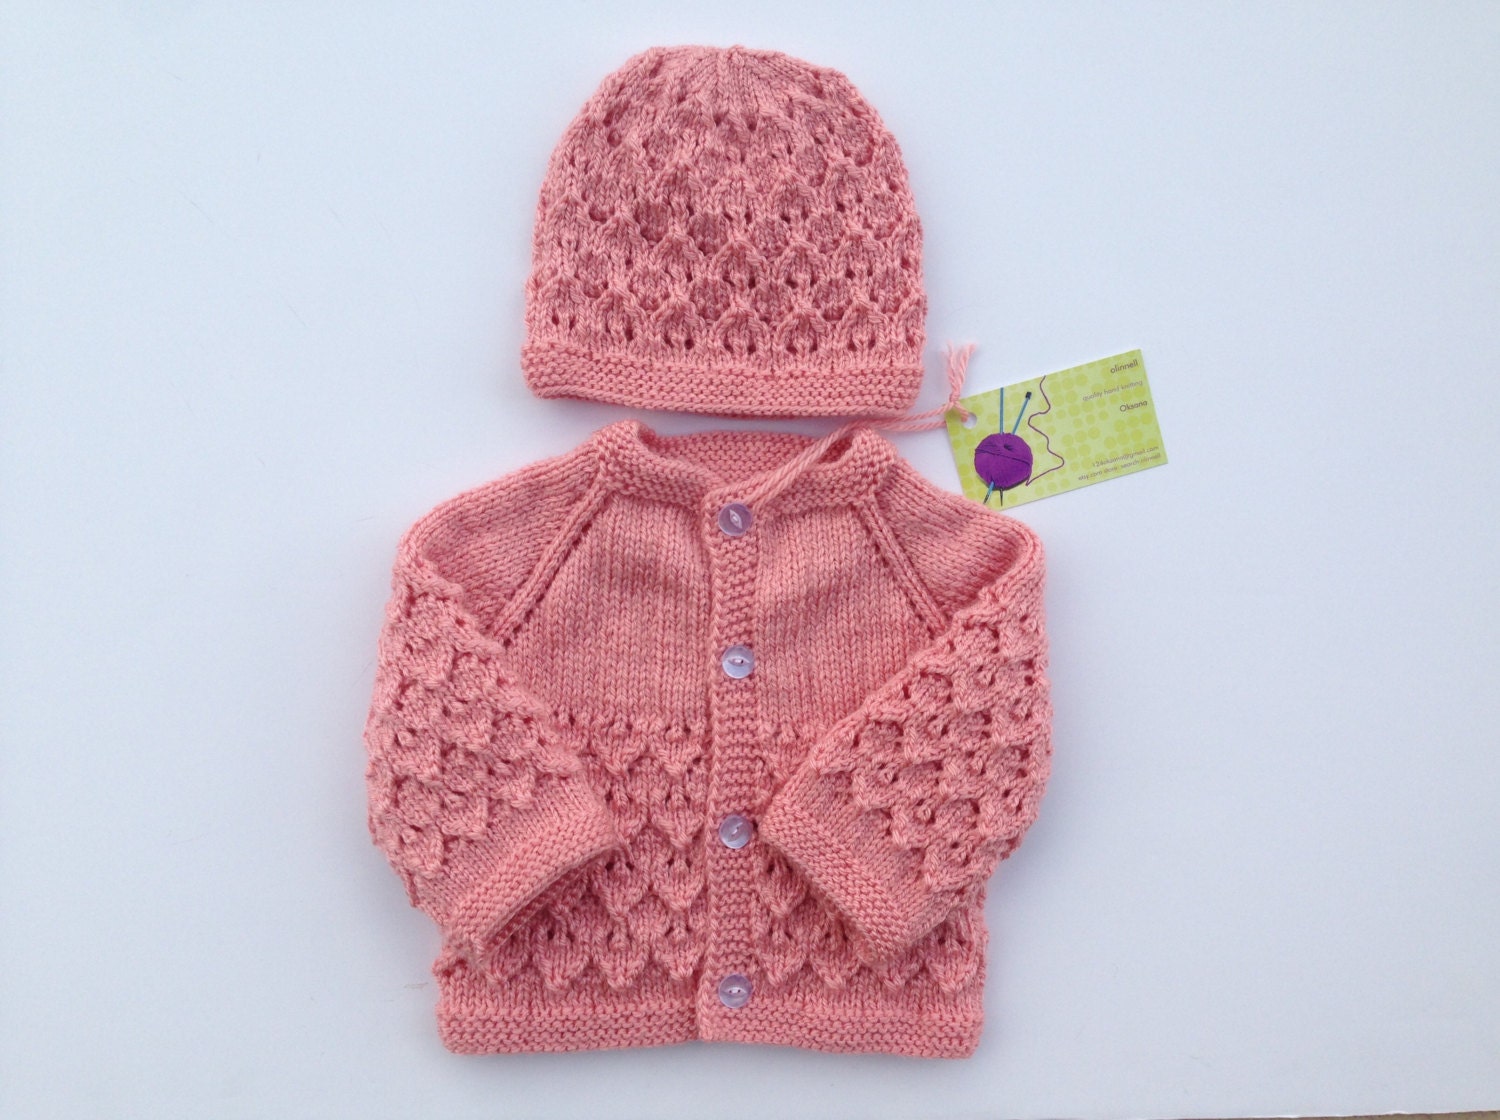 Hand knitted baby sweater cardigan and hat set 0-3 months old